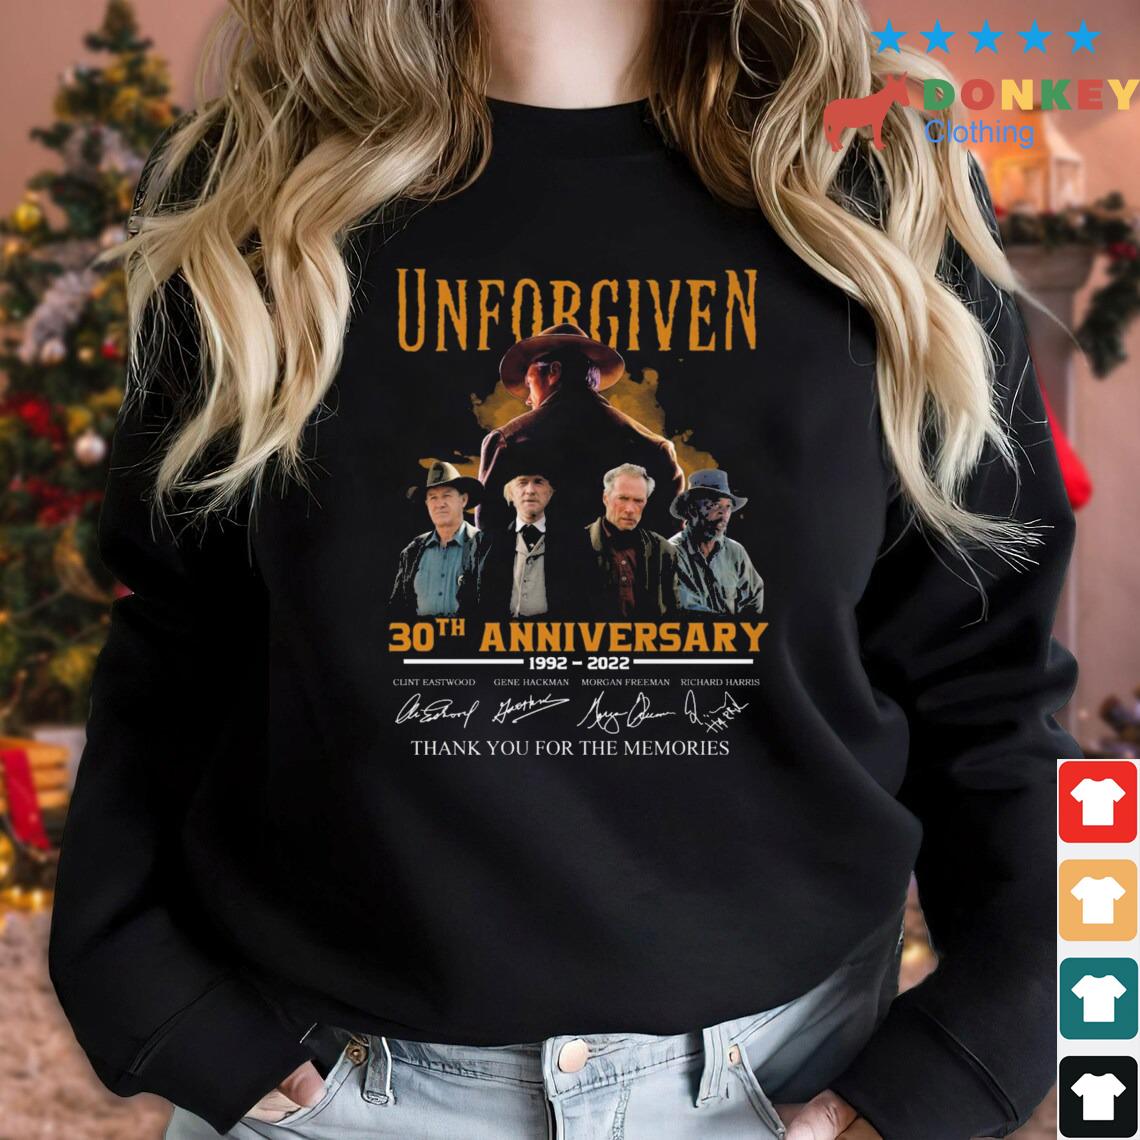 Unforgiven 30th Anniversary 1992-2022 Thank You For The Memories Signatures shirt